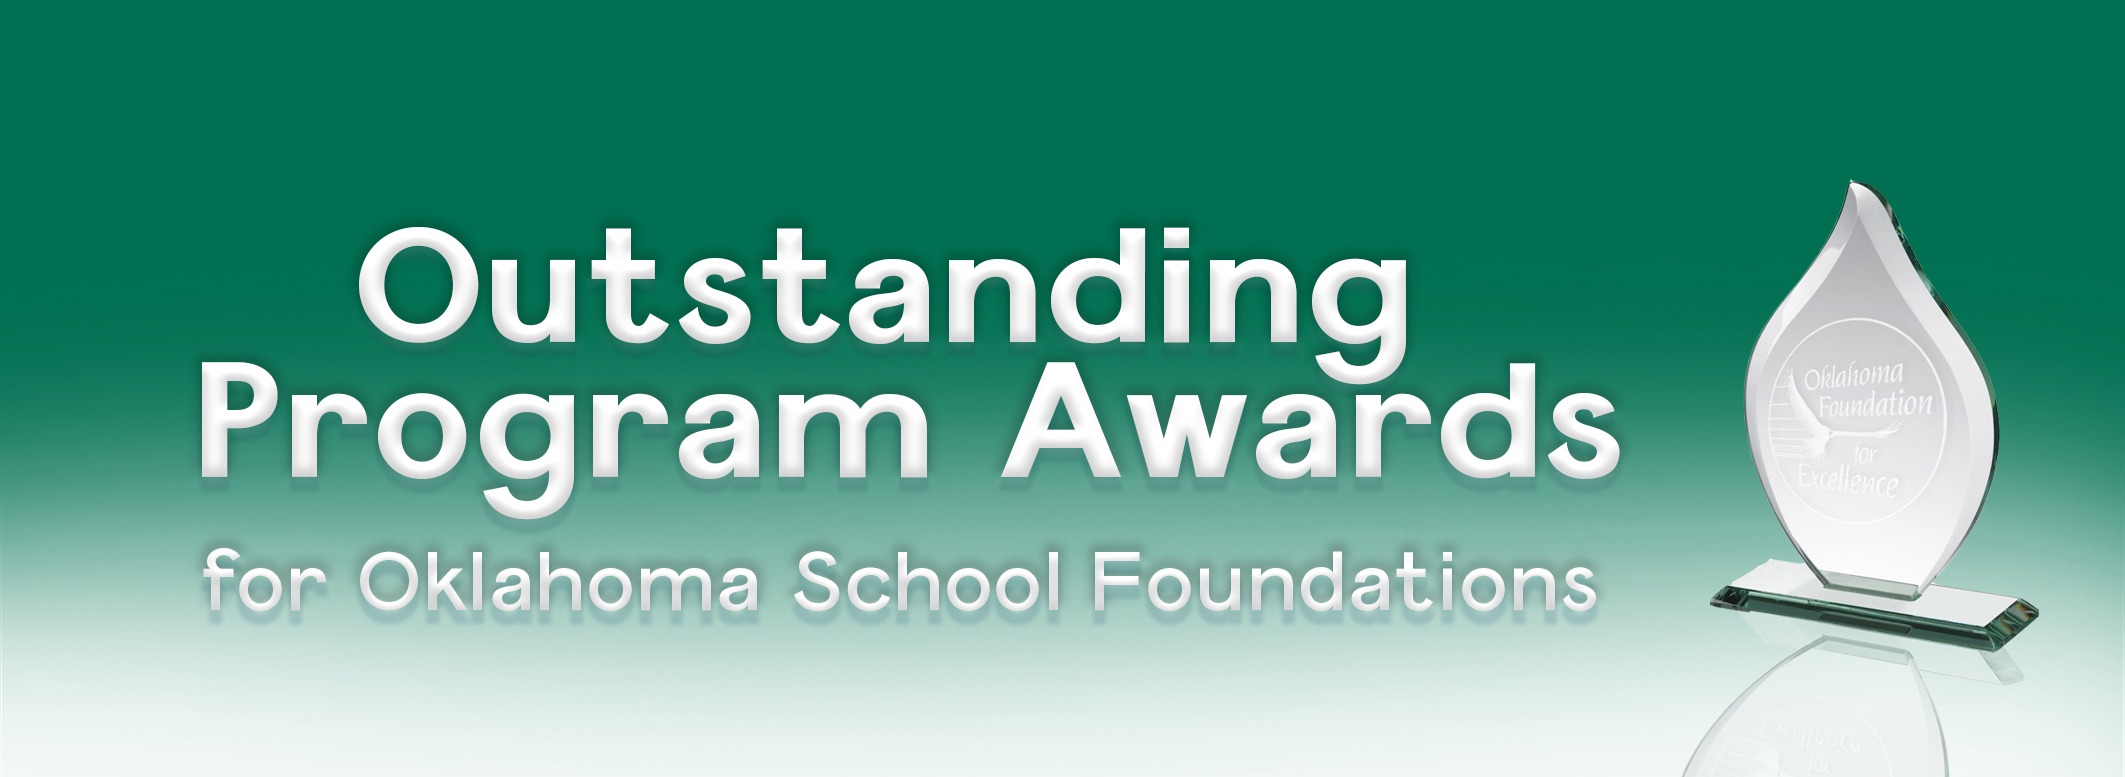 Nominations Sought for Outstanding Oklahoma School Foundation Program